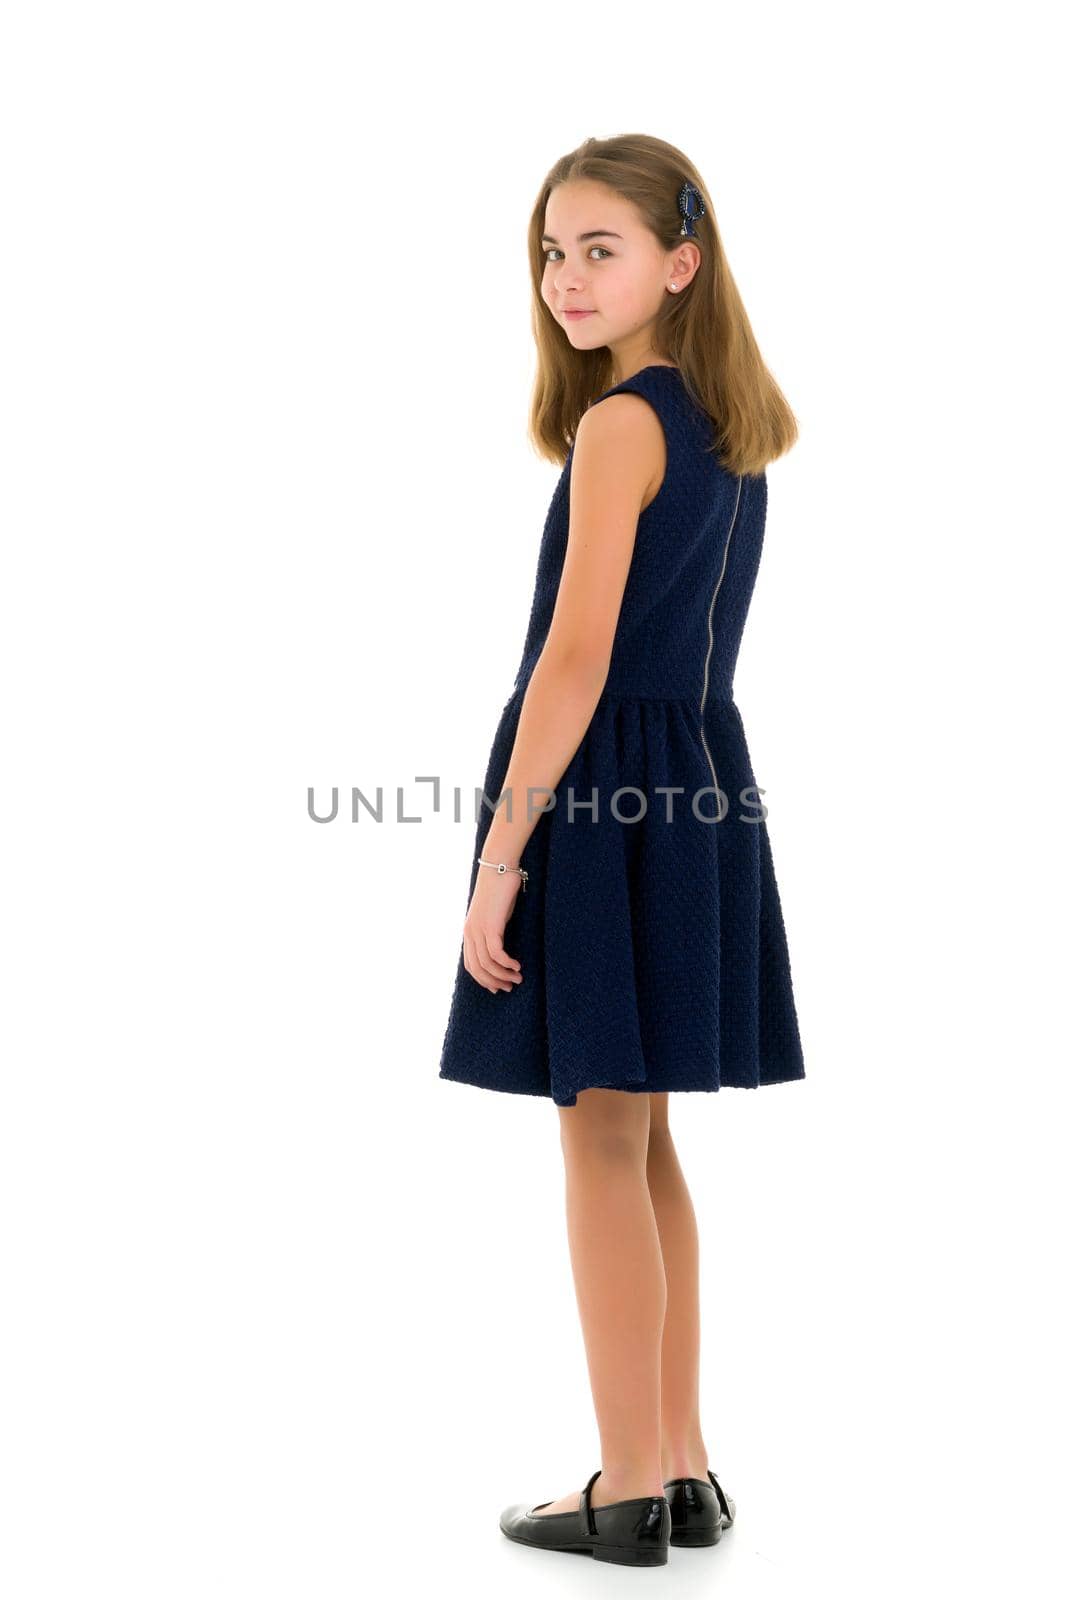 Beautiful little girl in an elegant dress in full growth. The concept of style and fashion. Layout for magazine cover. Isolated on white background.